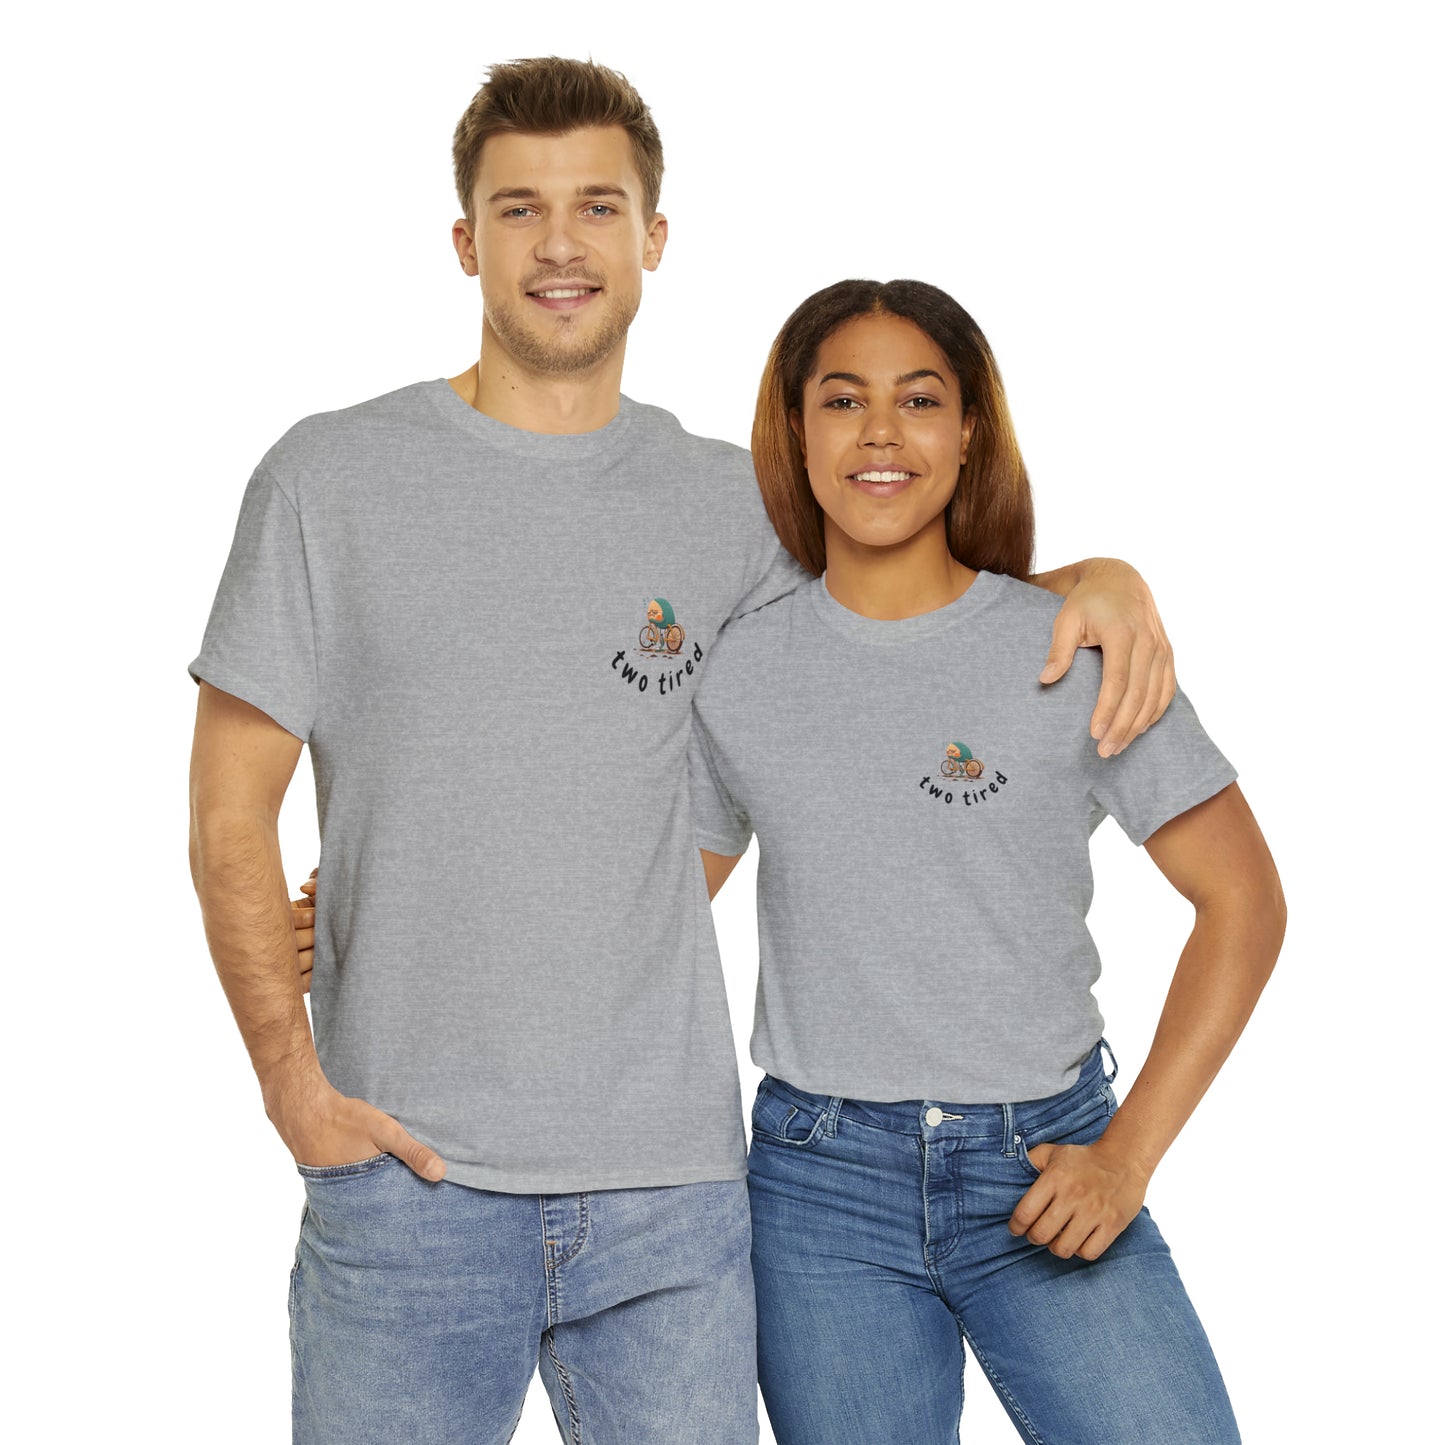 Two Tired - Unisex T-shirt